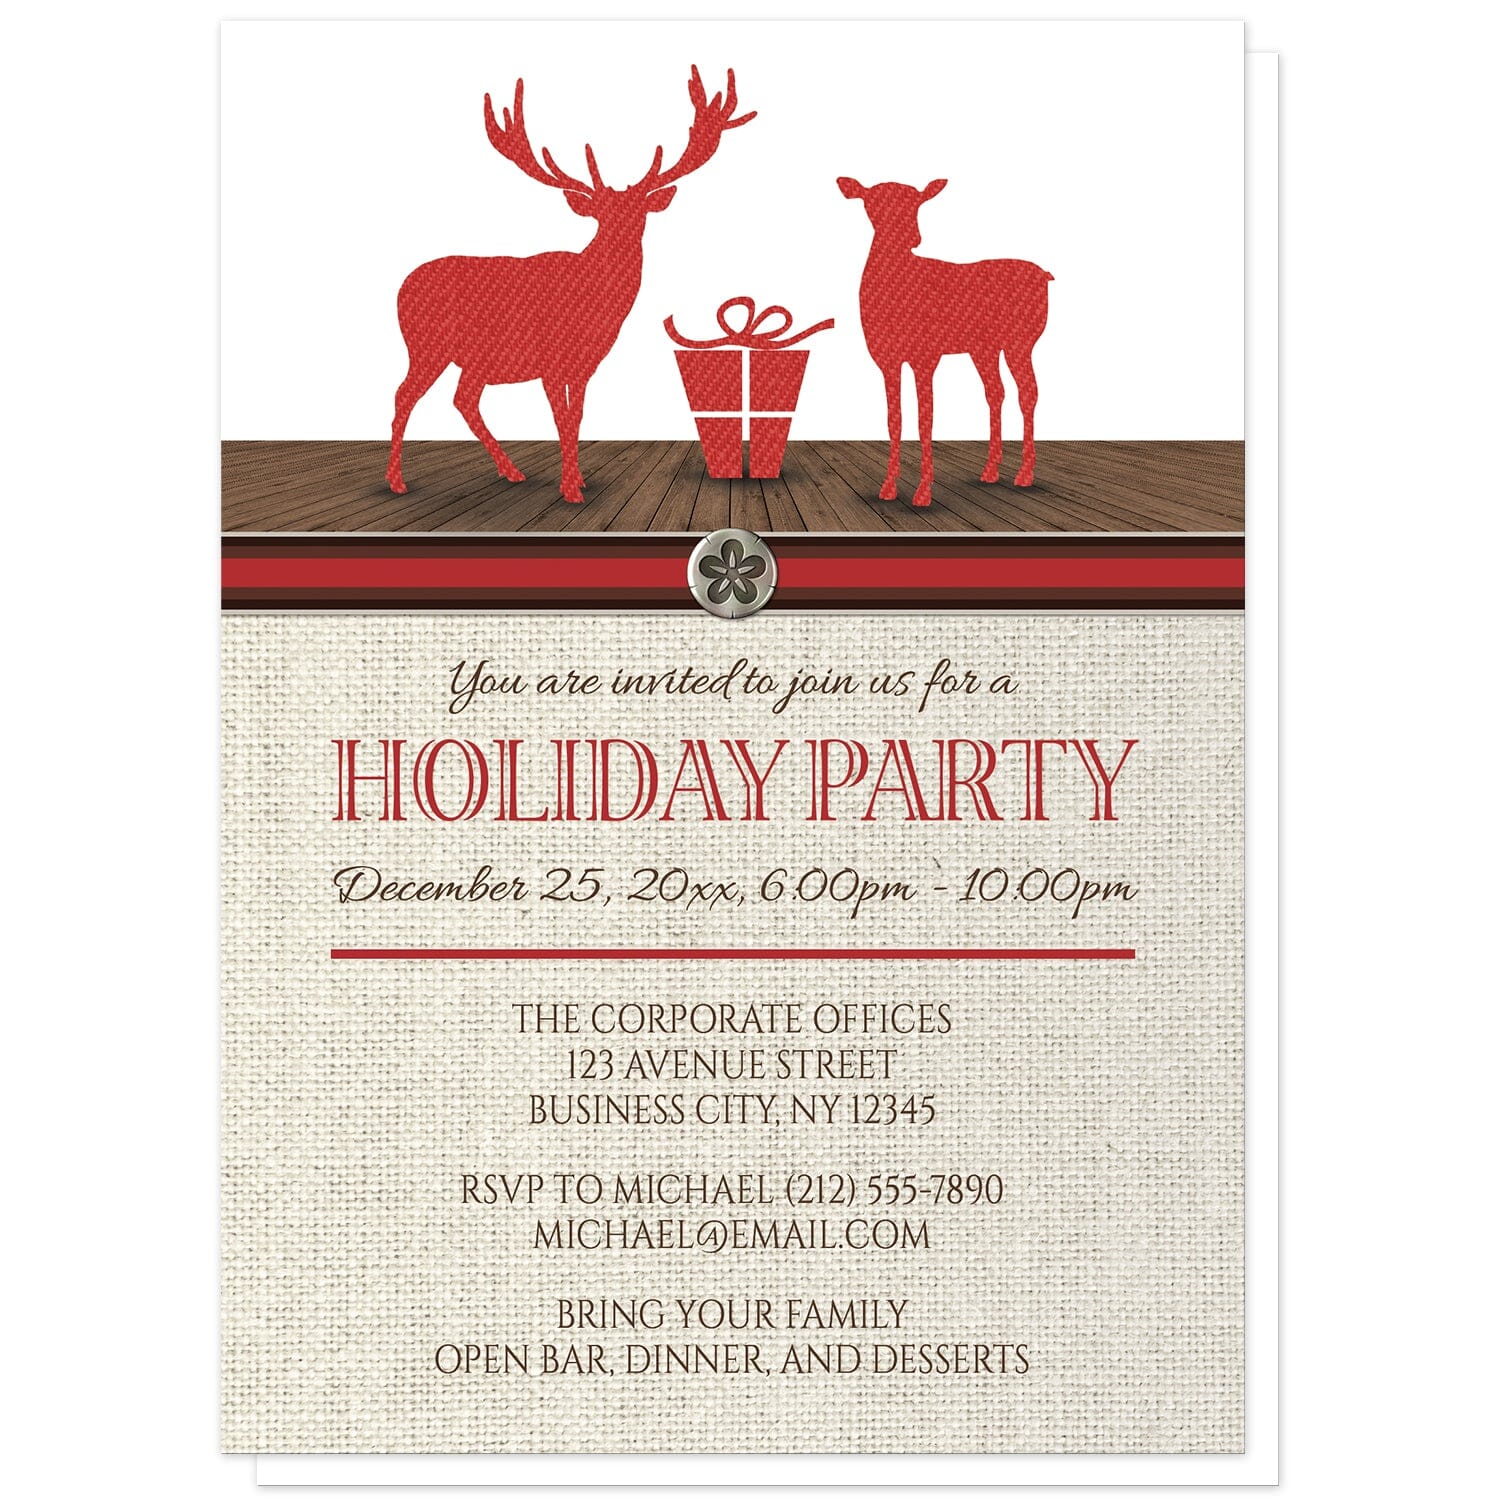 Rustic Deer Burlap Red Holiday Party Invitations at Artistically Invited. Rustic deer burlap red holiday party invitations designed with two deer standing with a present in a red silhouette design with a denim pattern on a brown wood floor at the top of the invitations. Your personalized holiday party details are custom printed in red and brown over a beige burlap background illustration. 